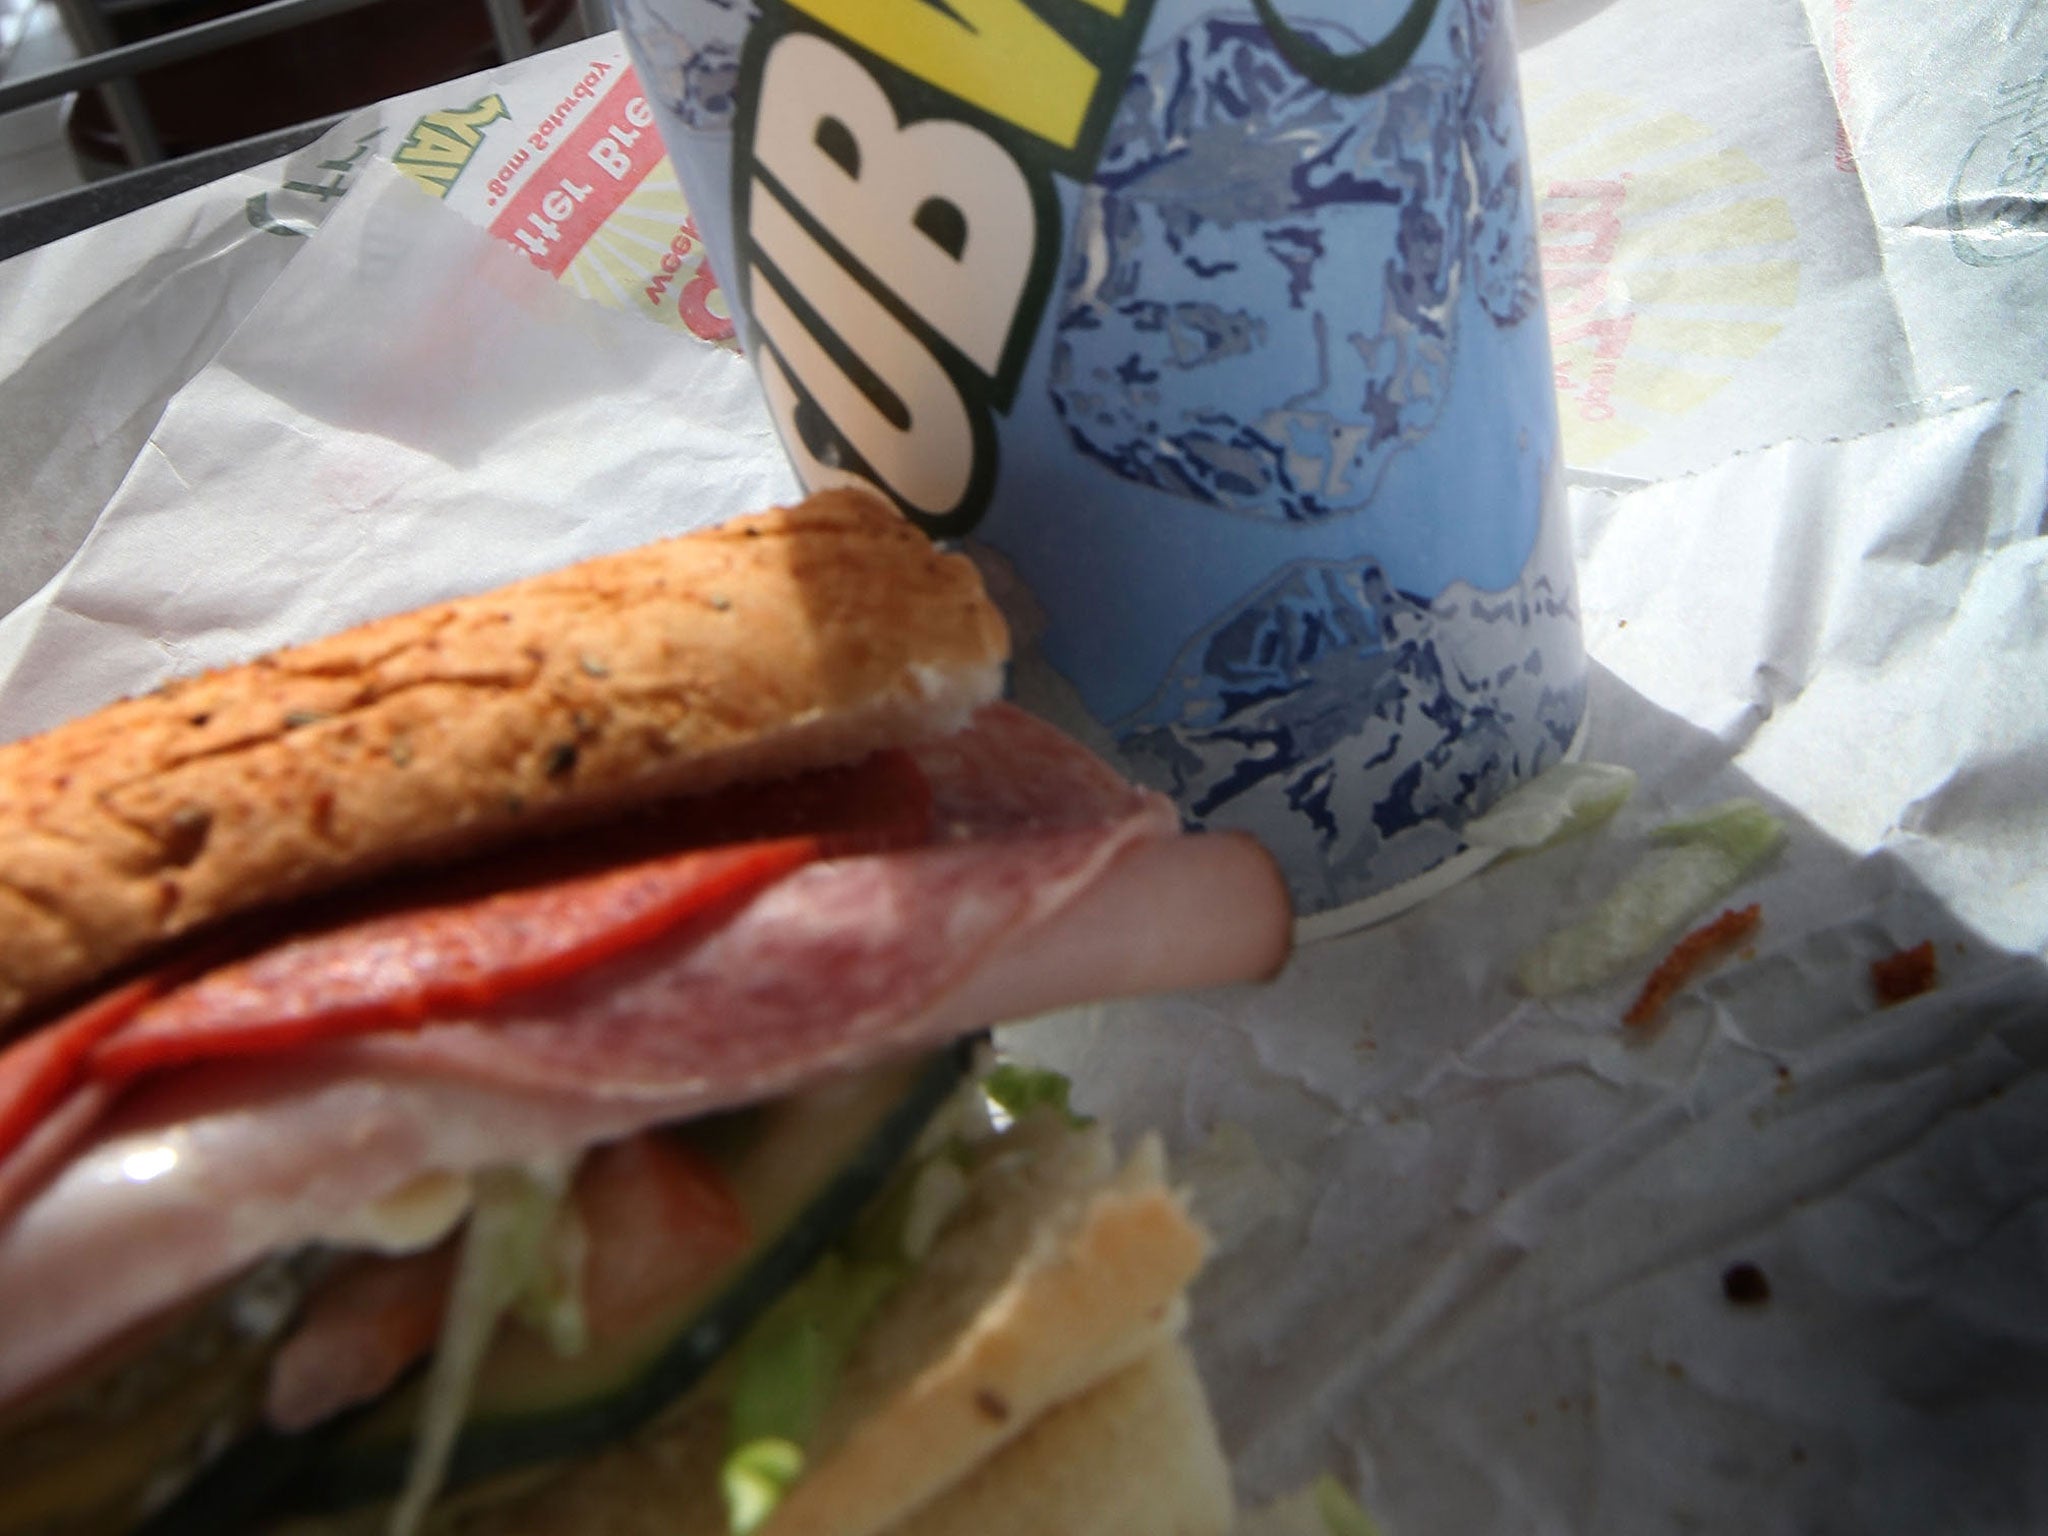 The men, John Farley, of Evesham and Charles Noah Pendrack, of Ocean City, are taking legal action in order to claim compensation and try to bring about a change in Subway's practices.